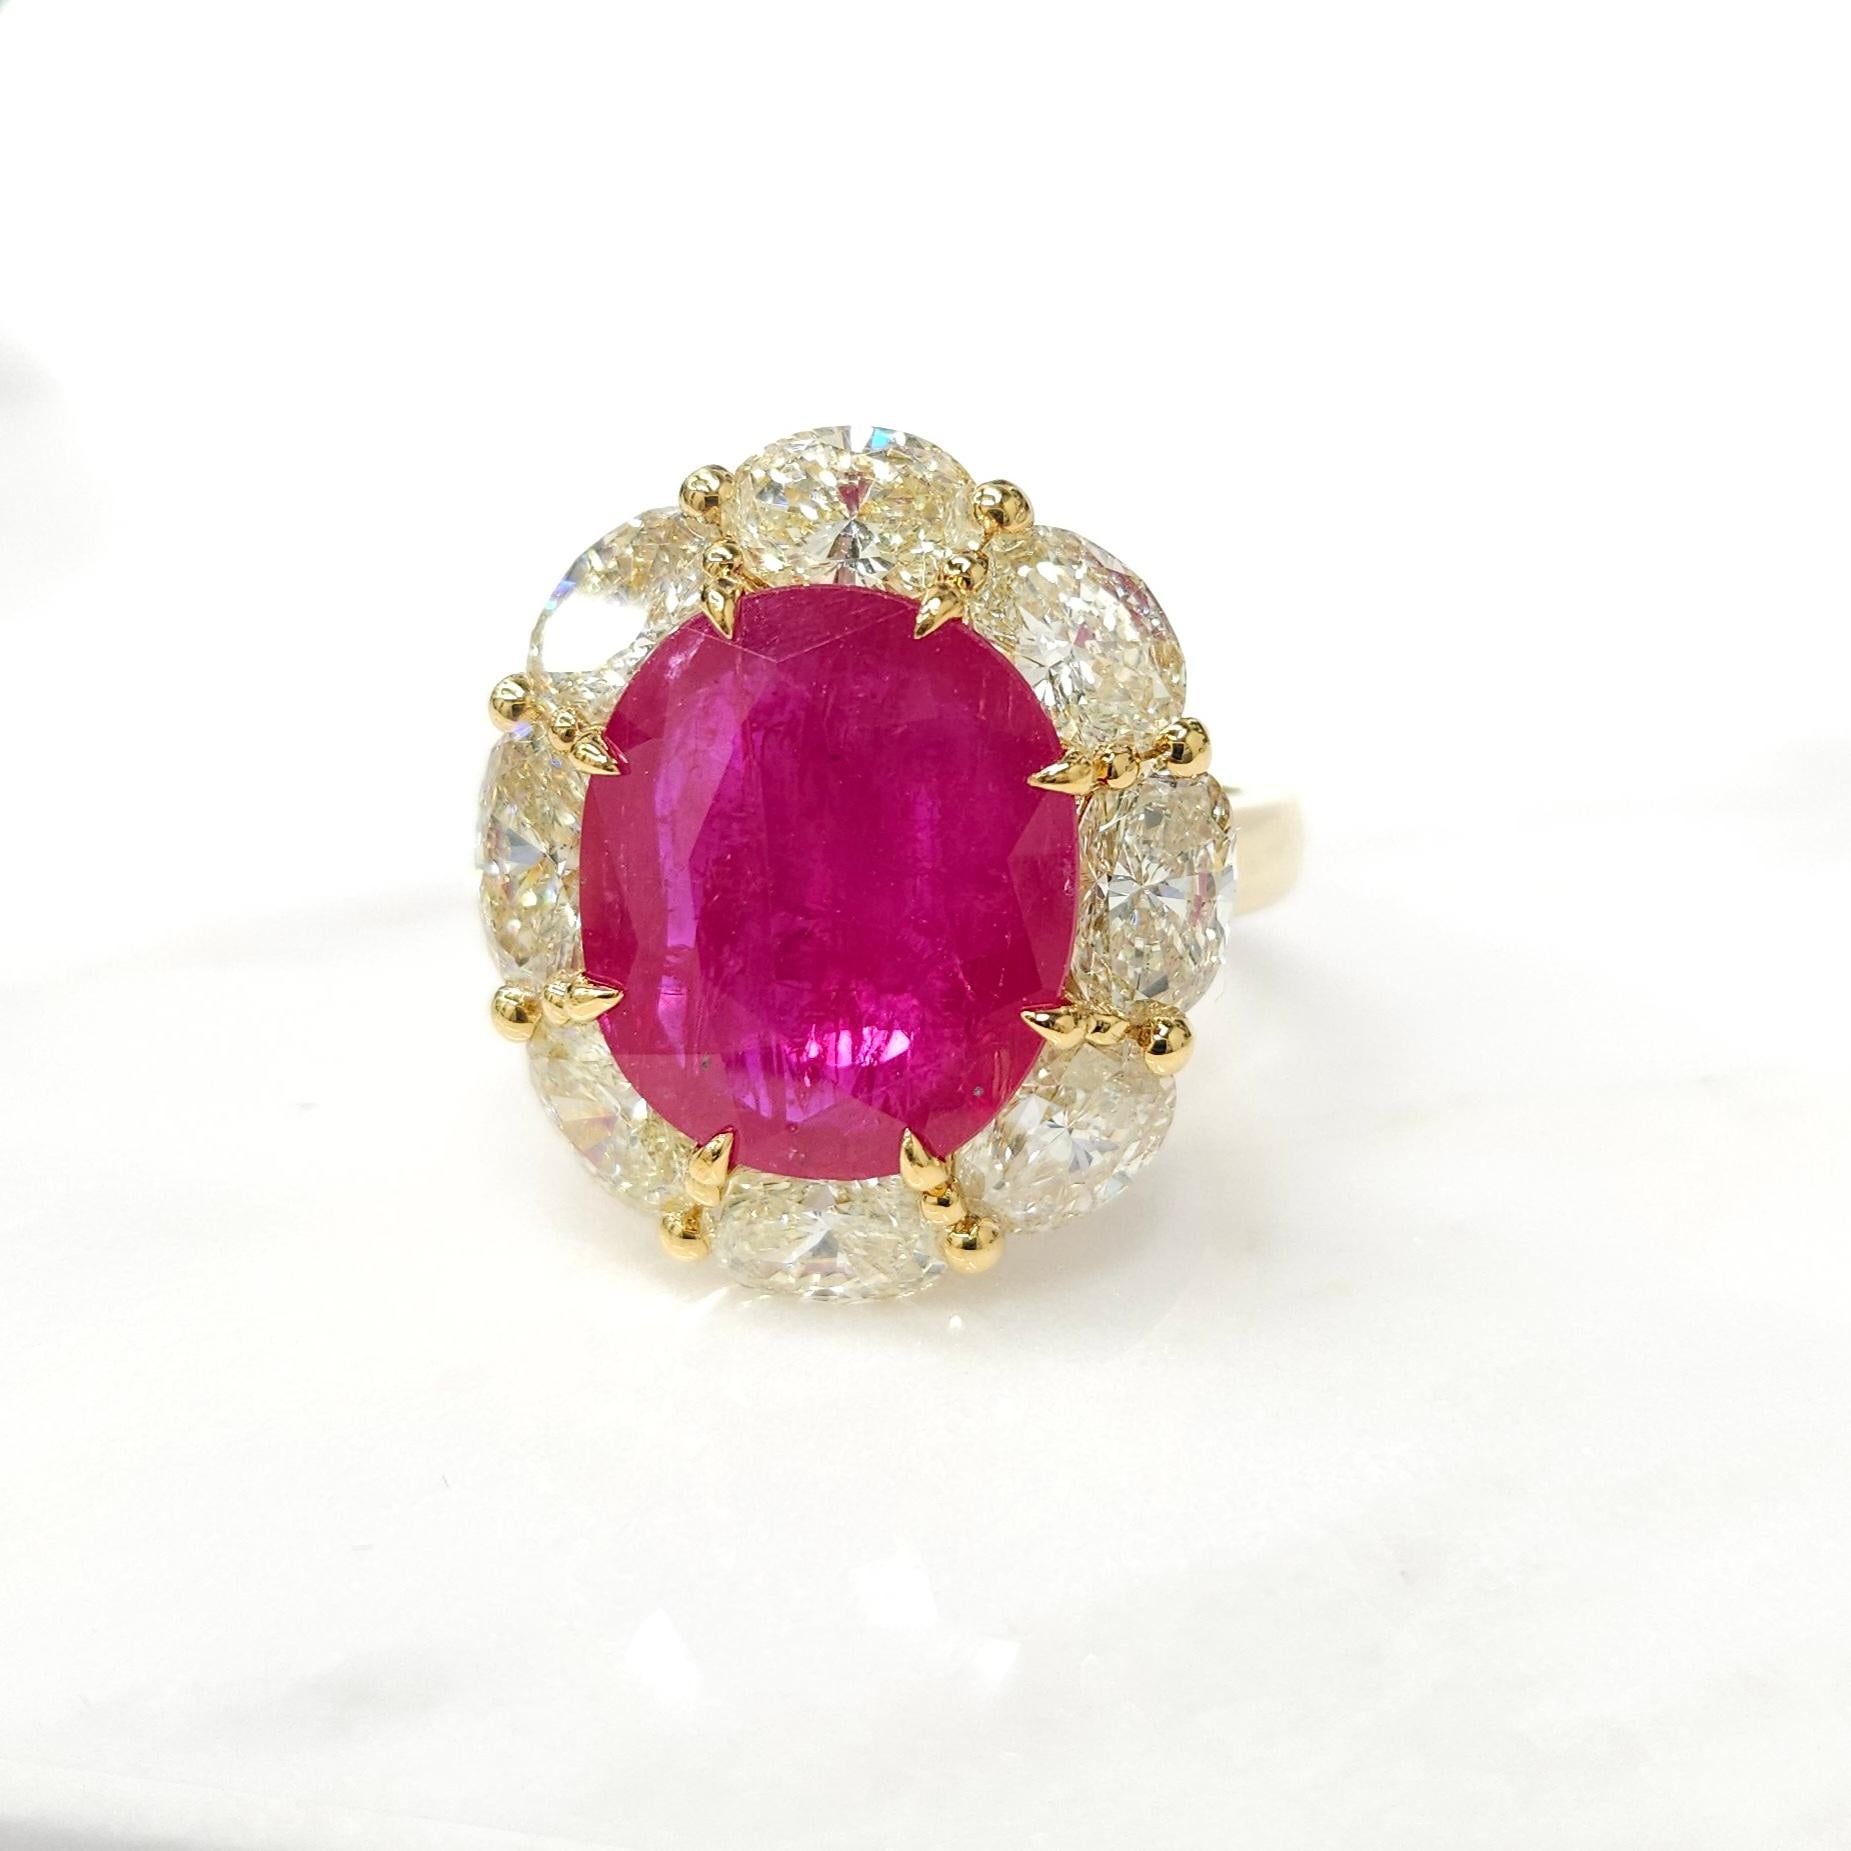 IGI Certified 6.53 Carat Ruby & 3.71 Carat Oval Diamond Ring in 18K Yellow Gold For Sale 6